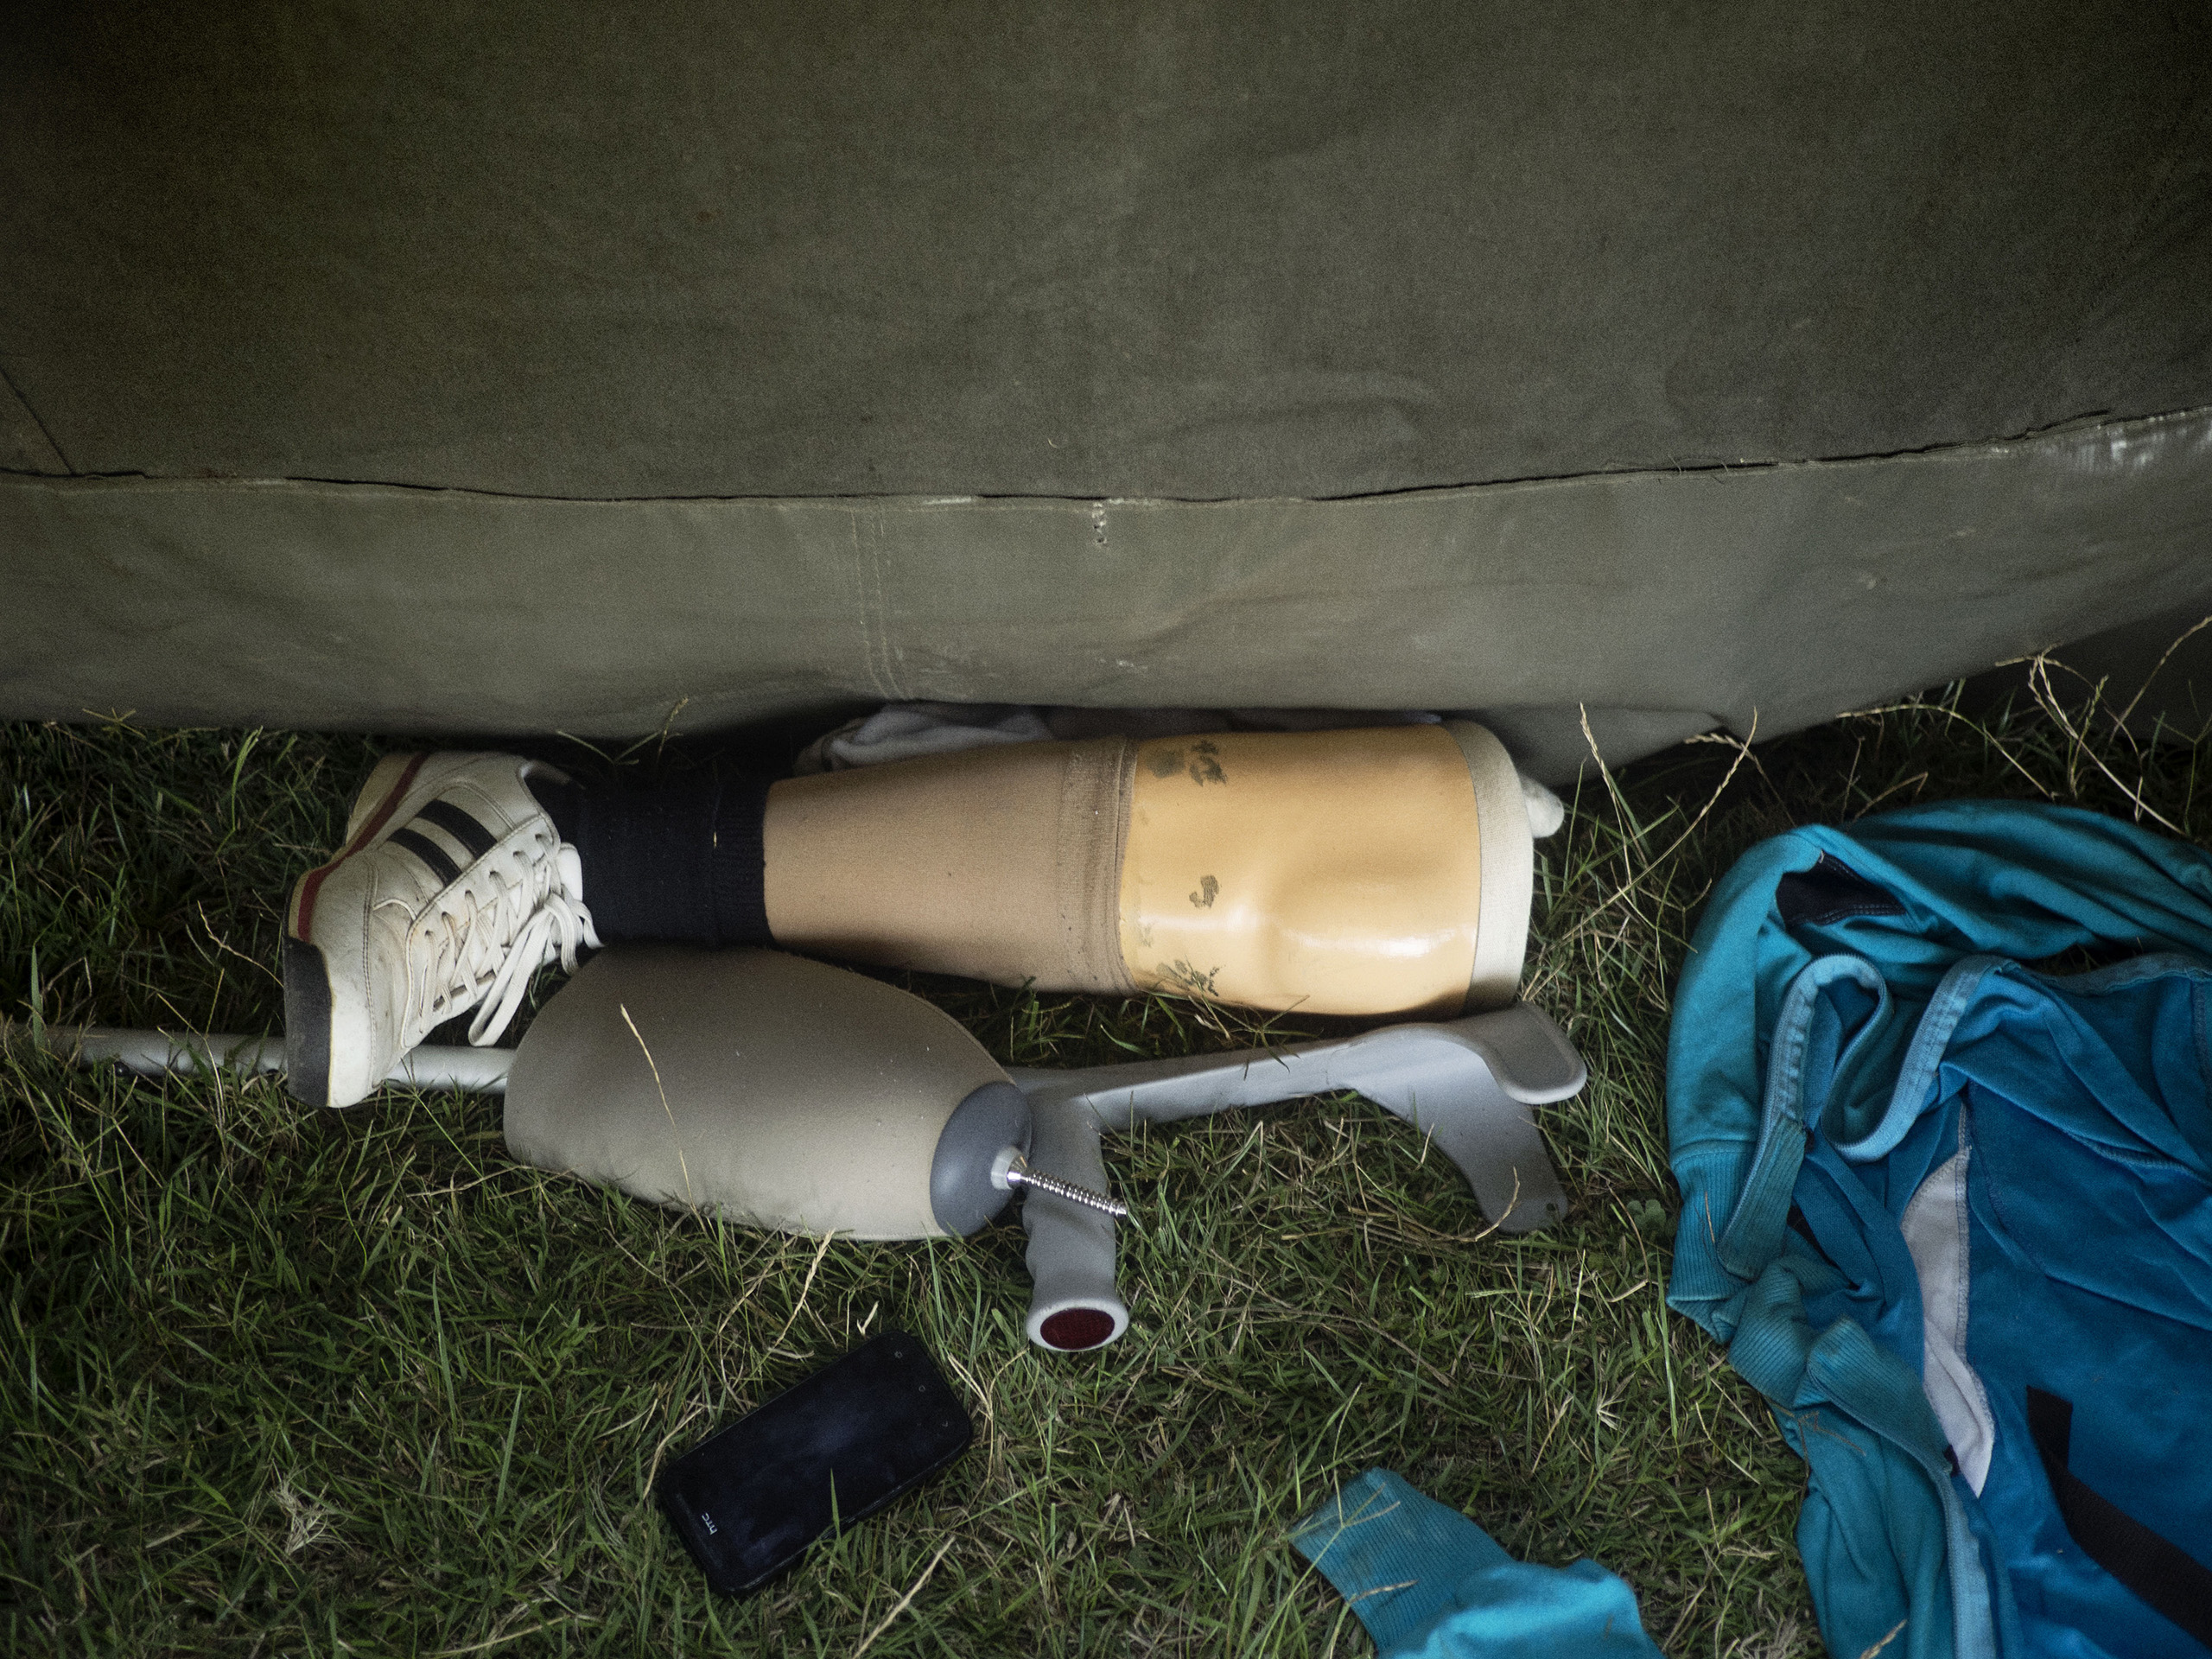 Vasariste, Serbia. August 12, 2015. A prosthetic leg in a refugee camp near the Serbian-Hungarian border.